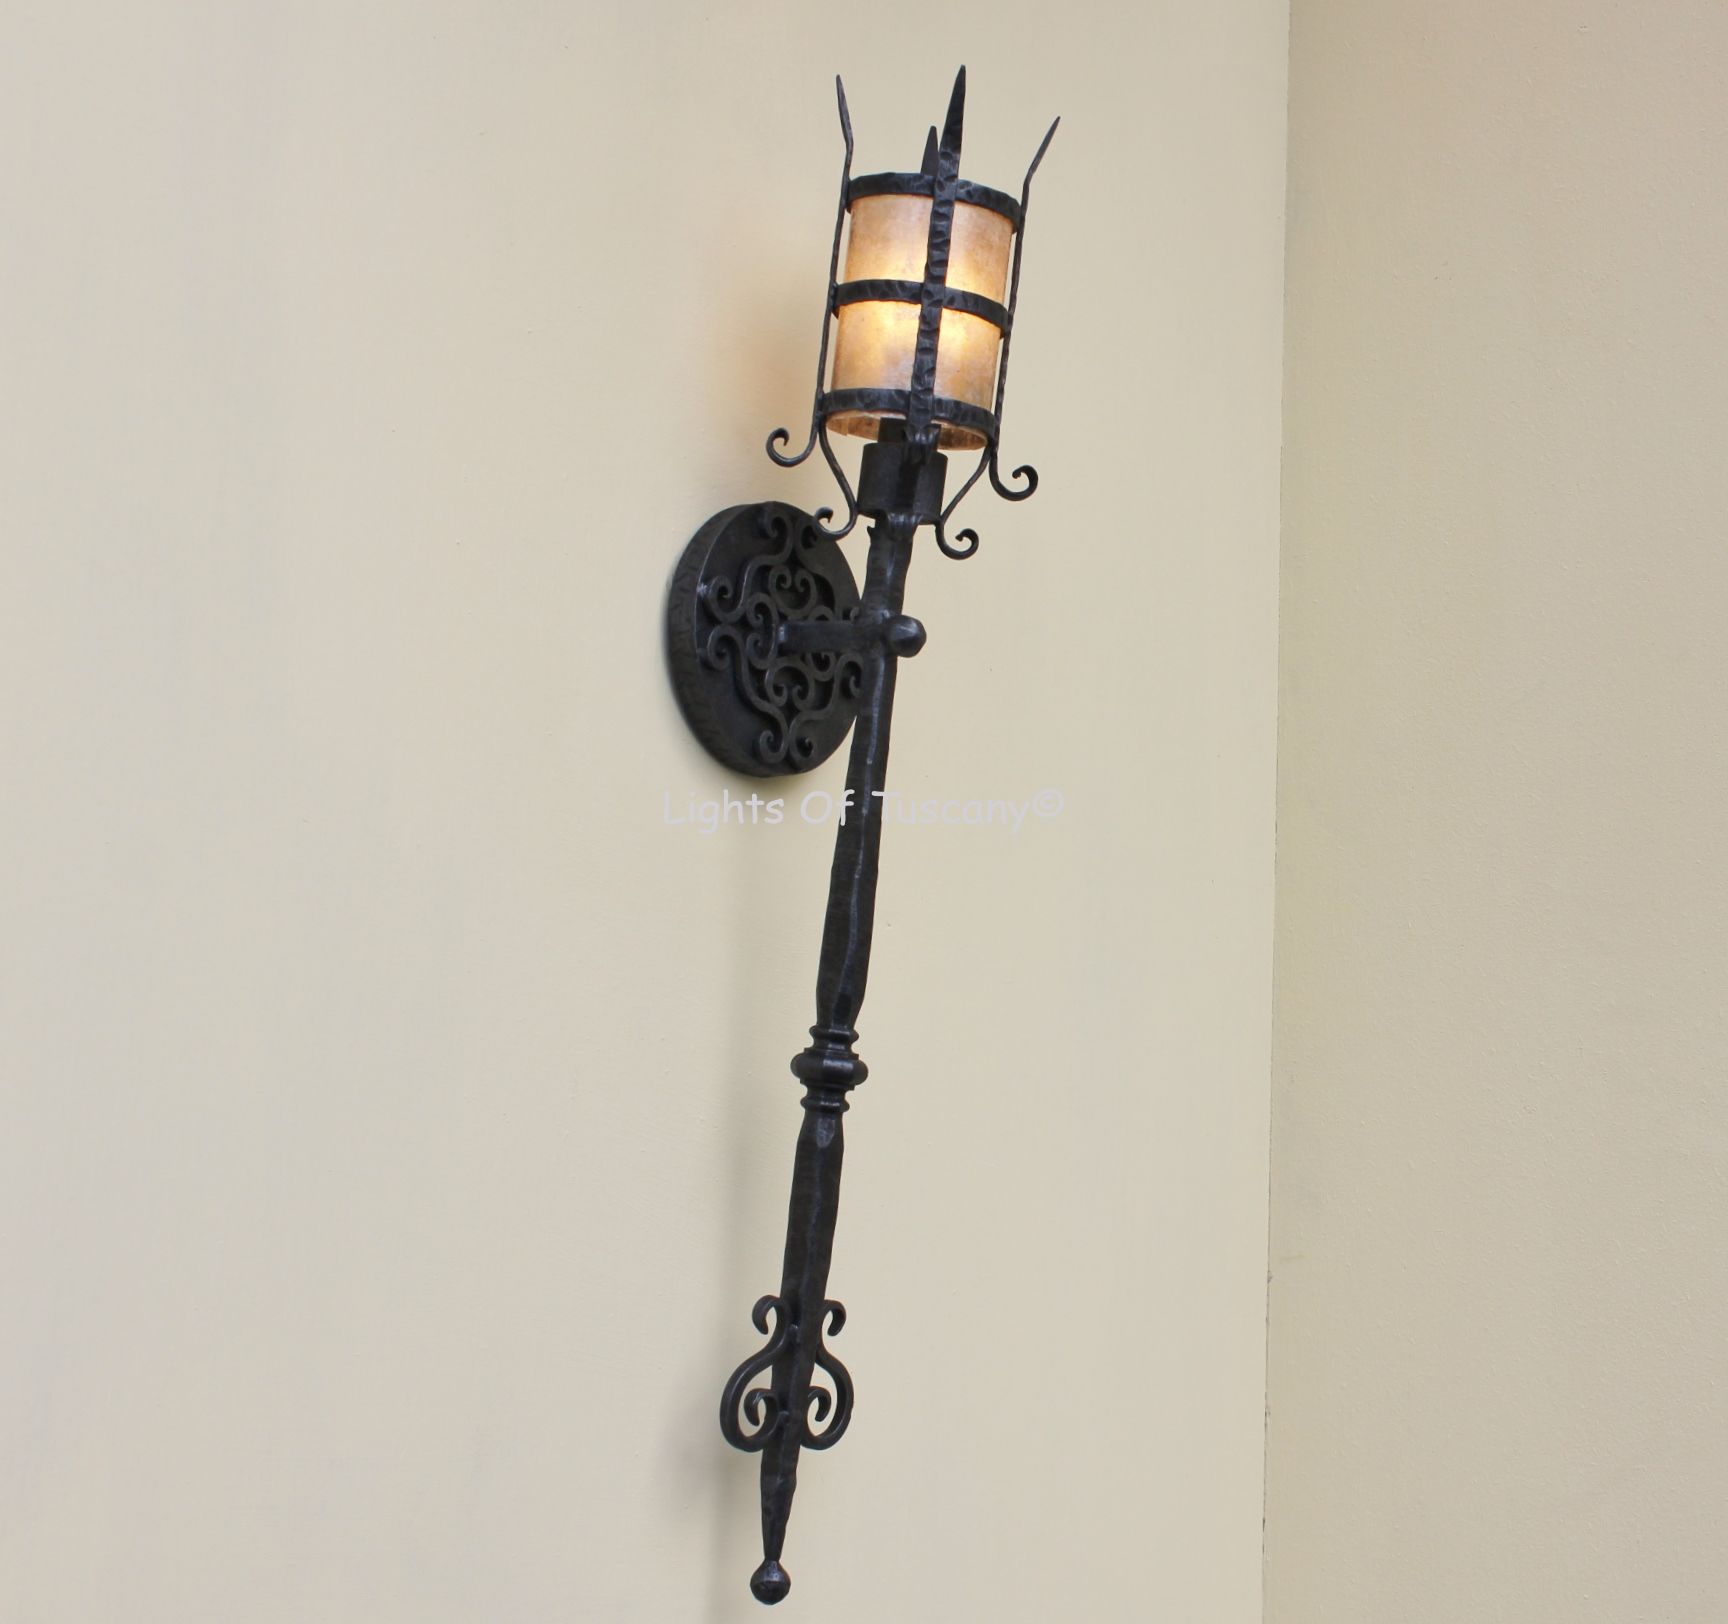 Lights of Tuscany 5450-1 Gothic Wall Torch Light Fixture